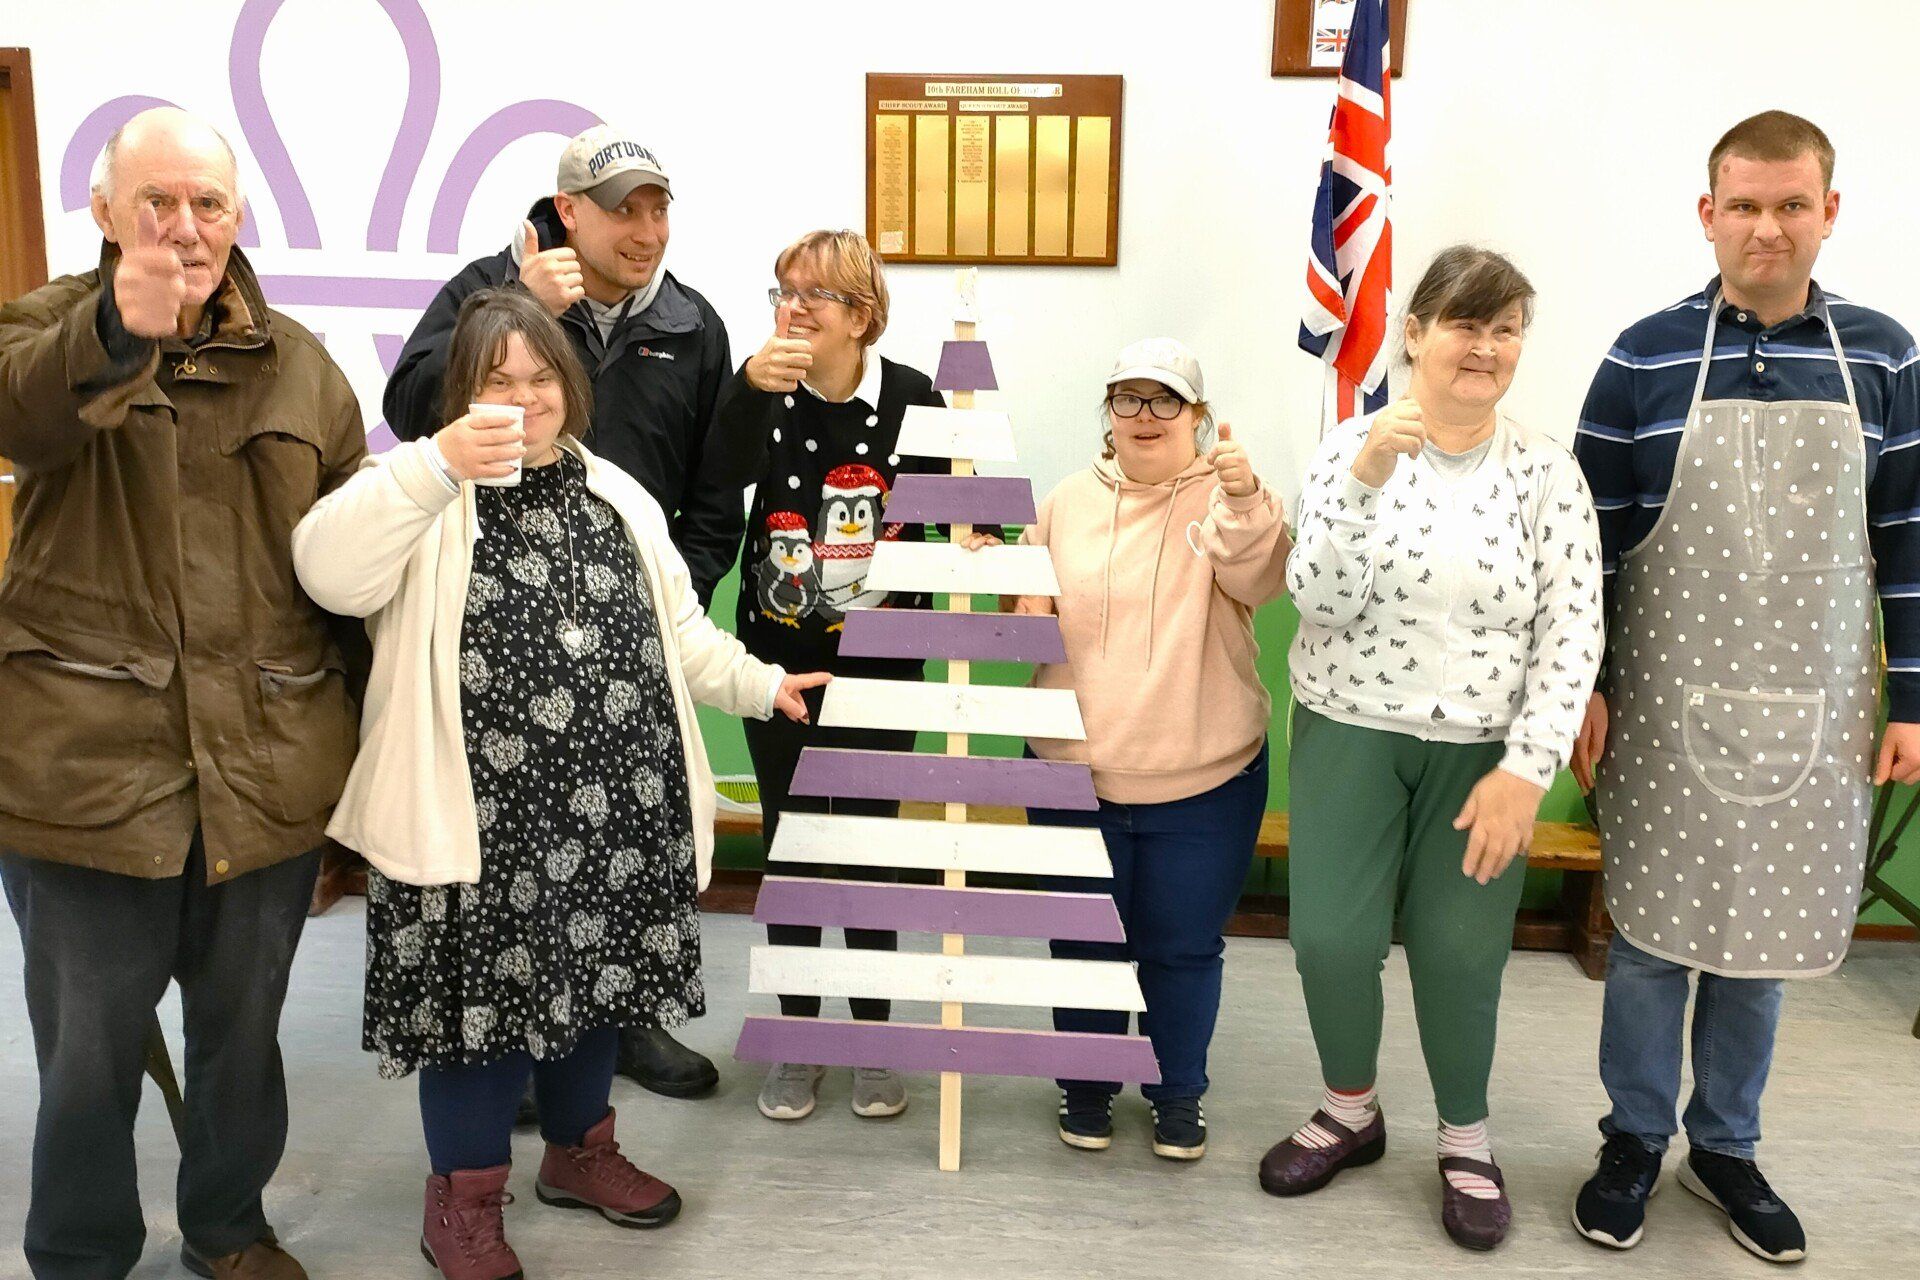 Several FNC members stand and smile, most with thumbs up, holding 1.5 metre  tall  finished banded alternate purple and white painted wood nailed to central piece forming a decorative triangular tree shape.